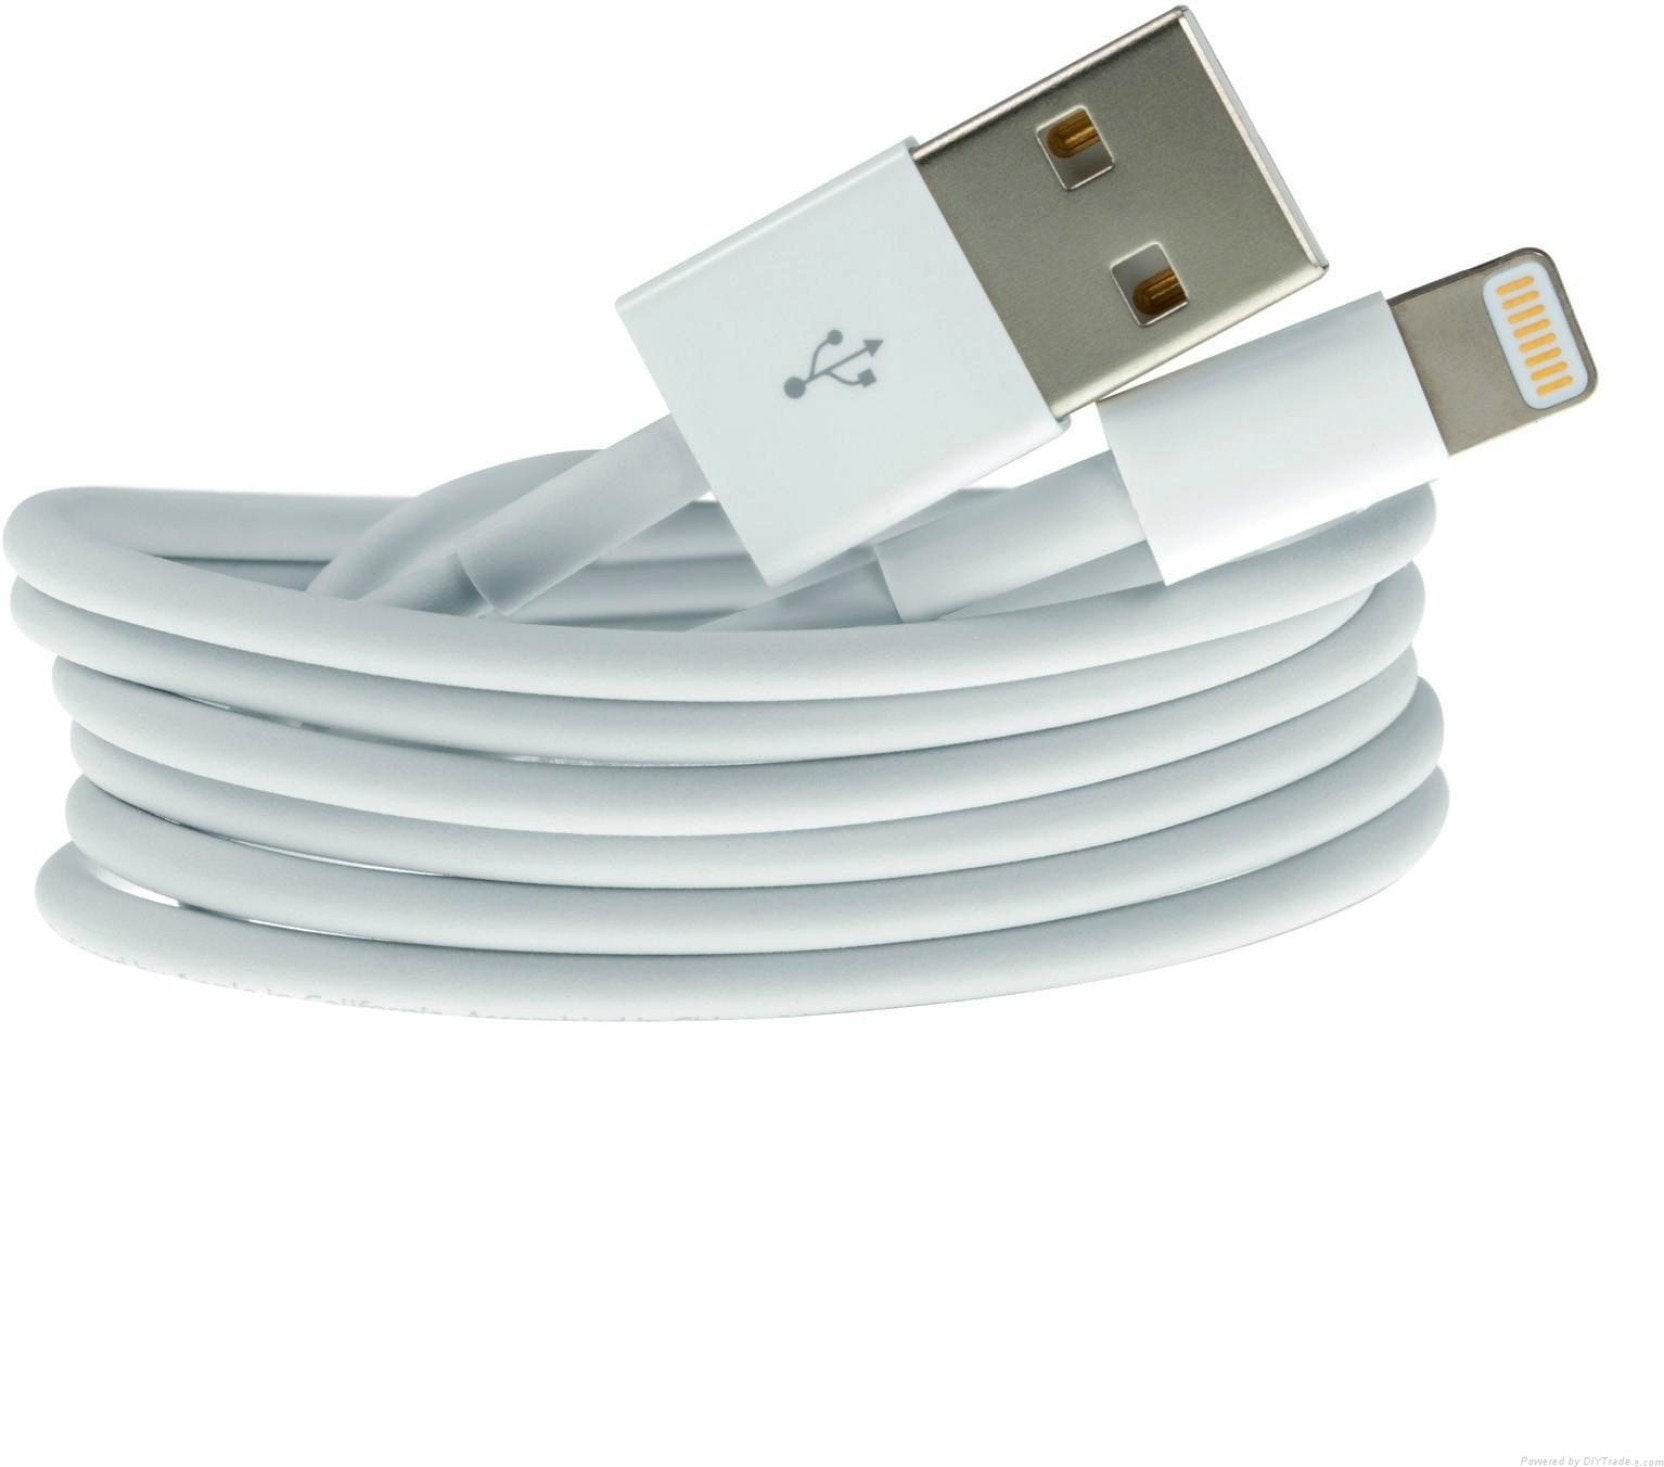 Lightning To Usb Charge and Data Sync Lightning Cable for Apple iPhone SE (2019)- 1 M White